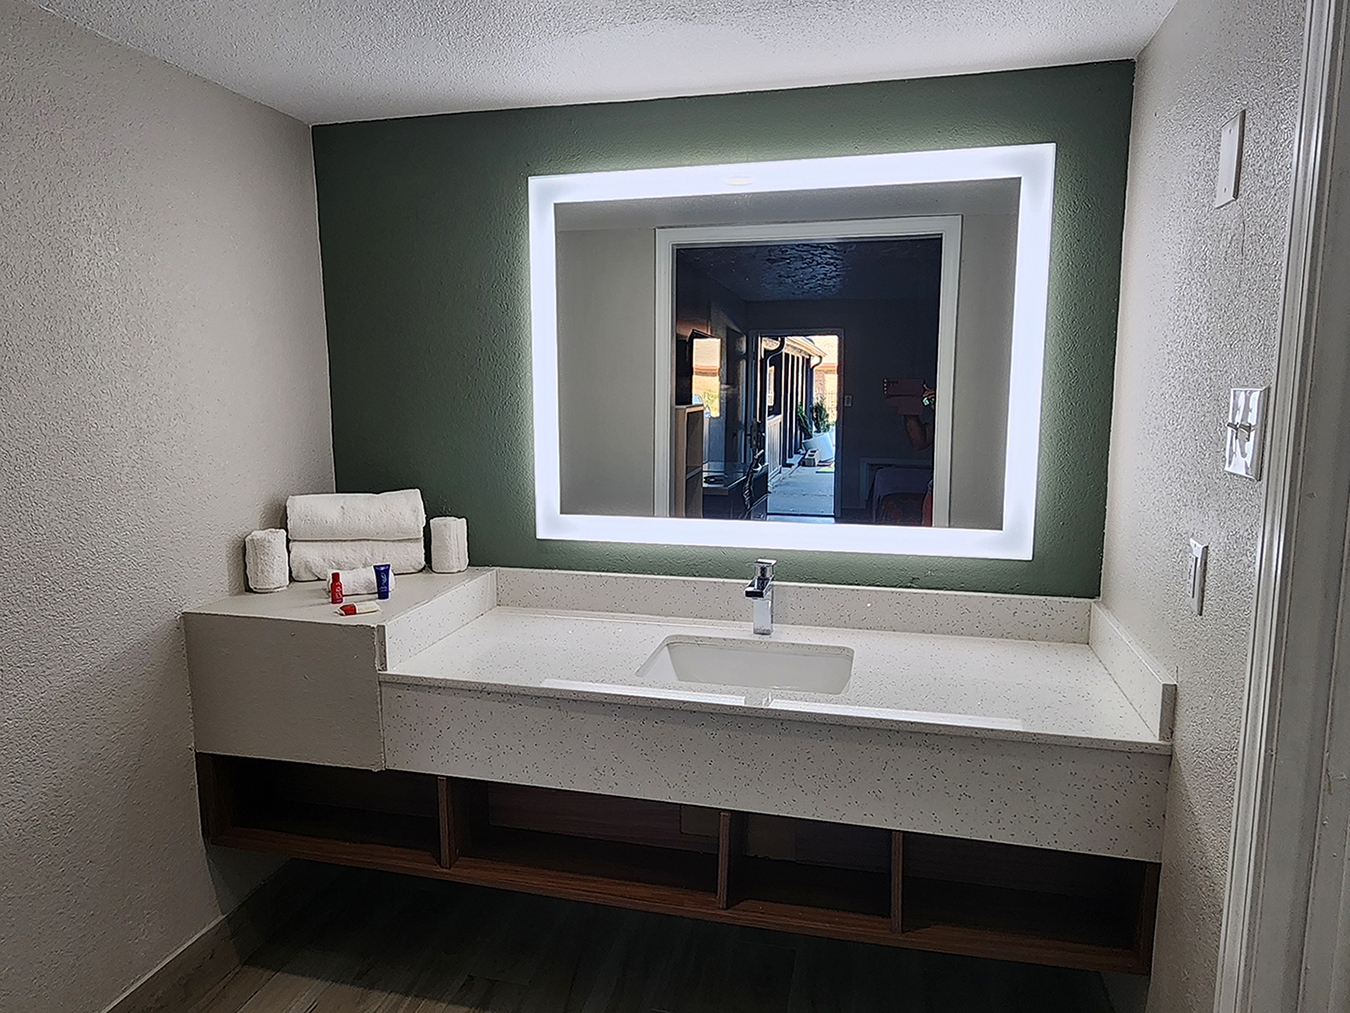 The vanity area in a king room at the Americas Best Value Inn Longview with a counter, sink, mirror outlined with lights, and towels stacked in the corner.